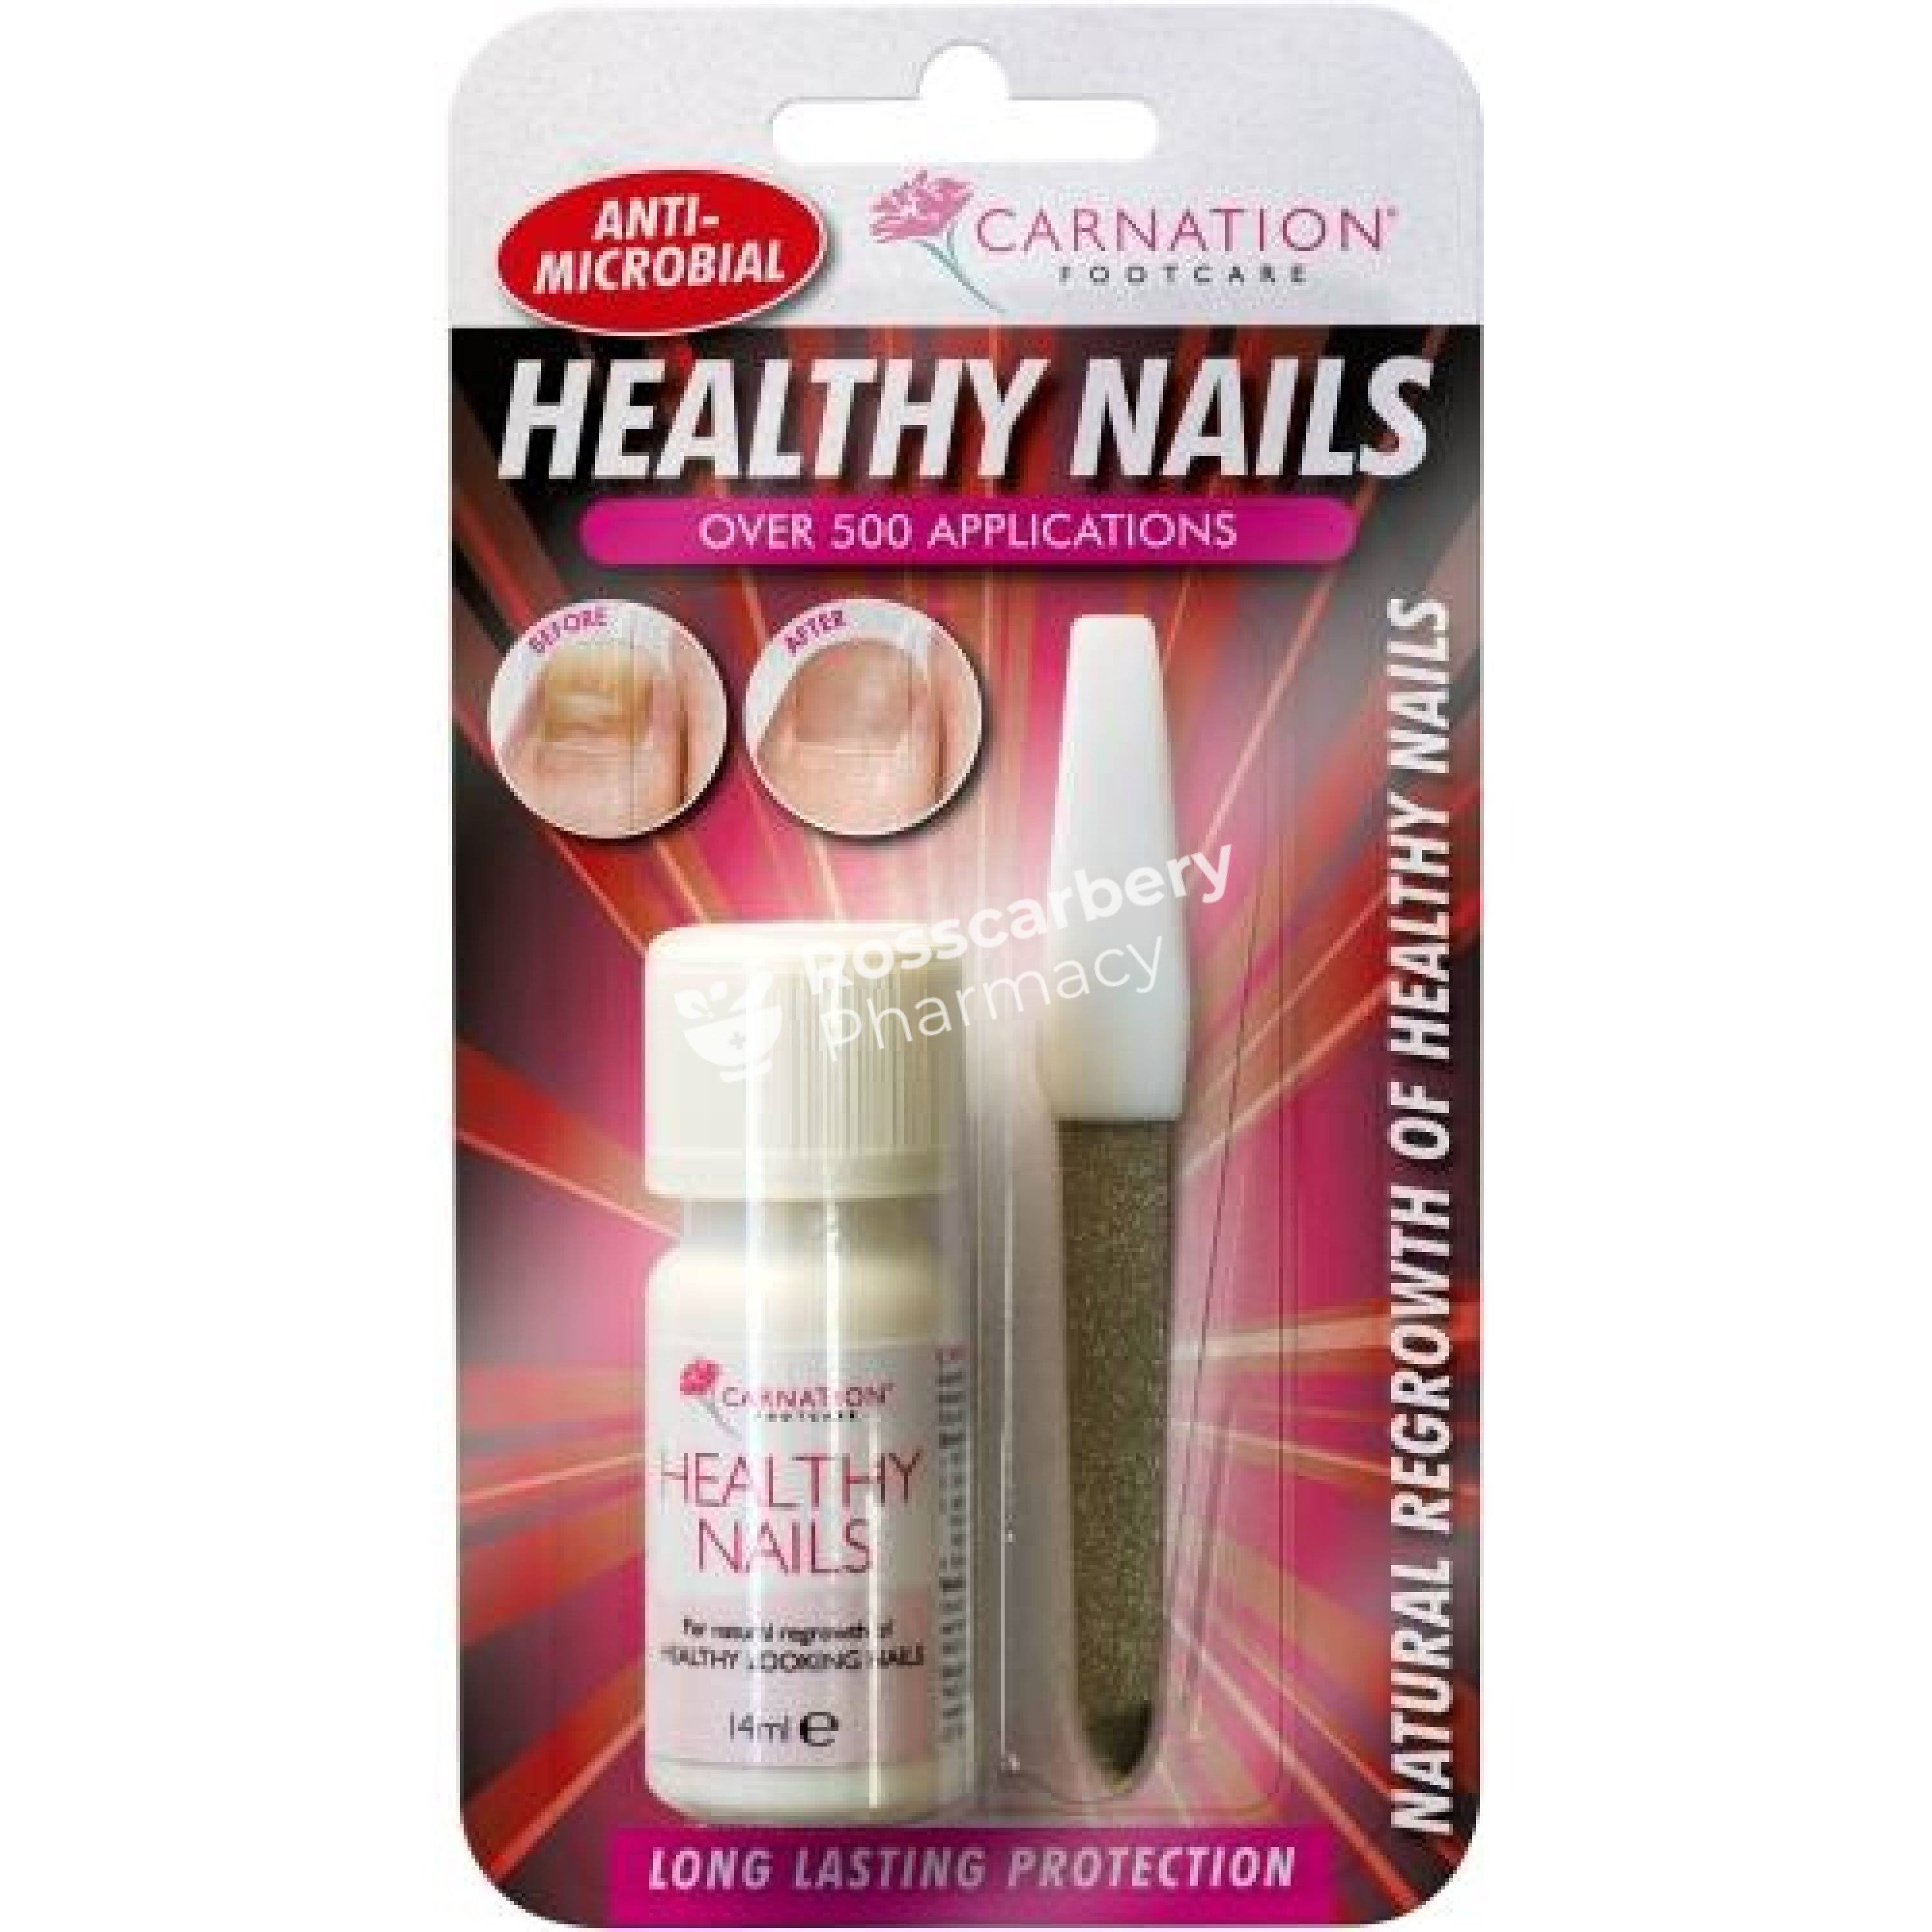 Carnation Footcare Healthy Nails 14ml